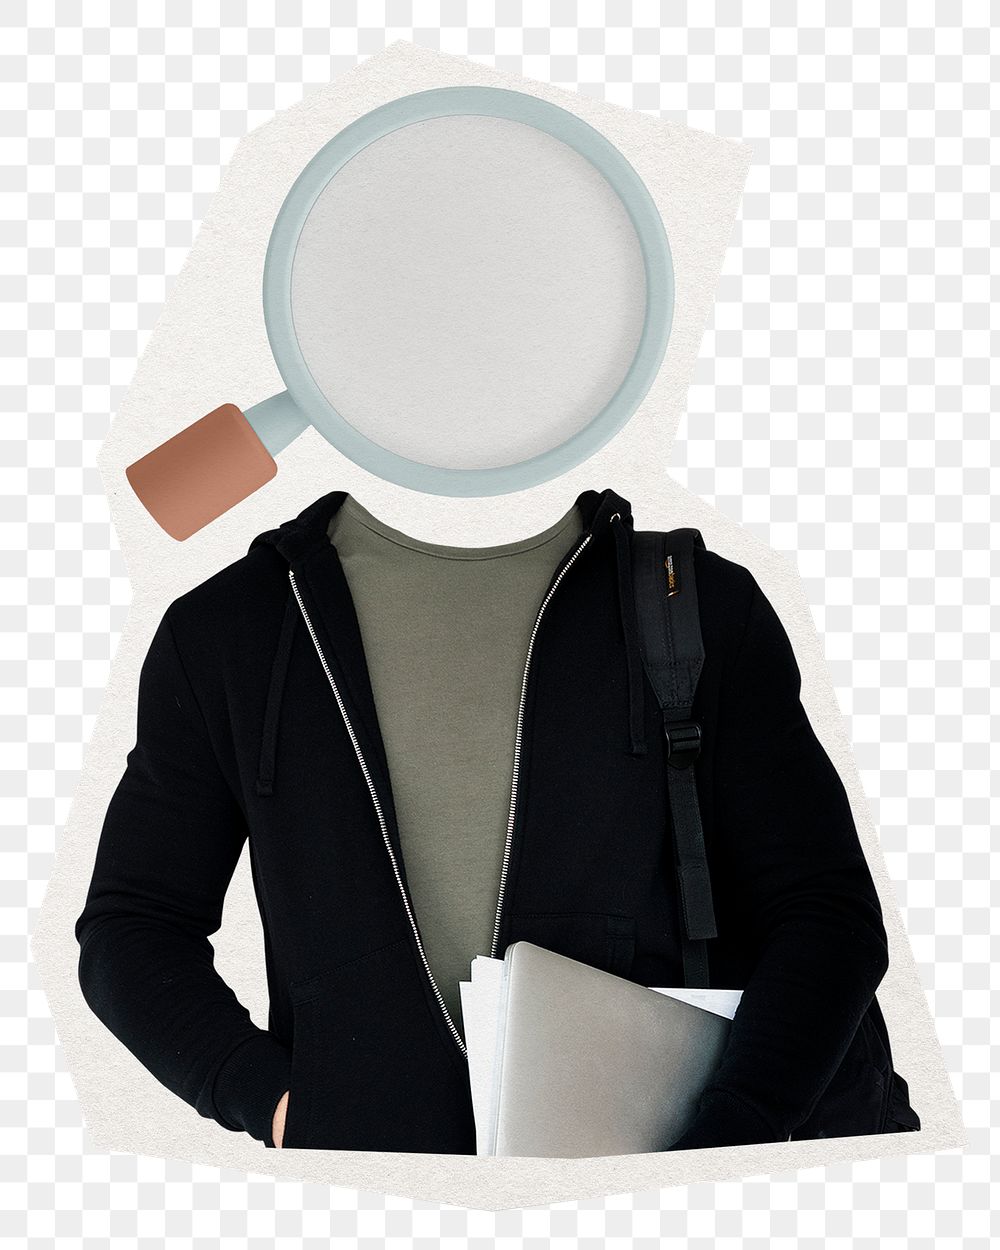 Magnifying glass png head man, student, education remixed media, transparent background